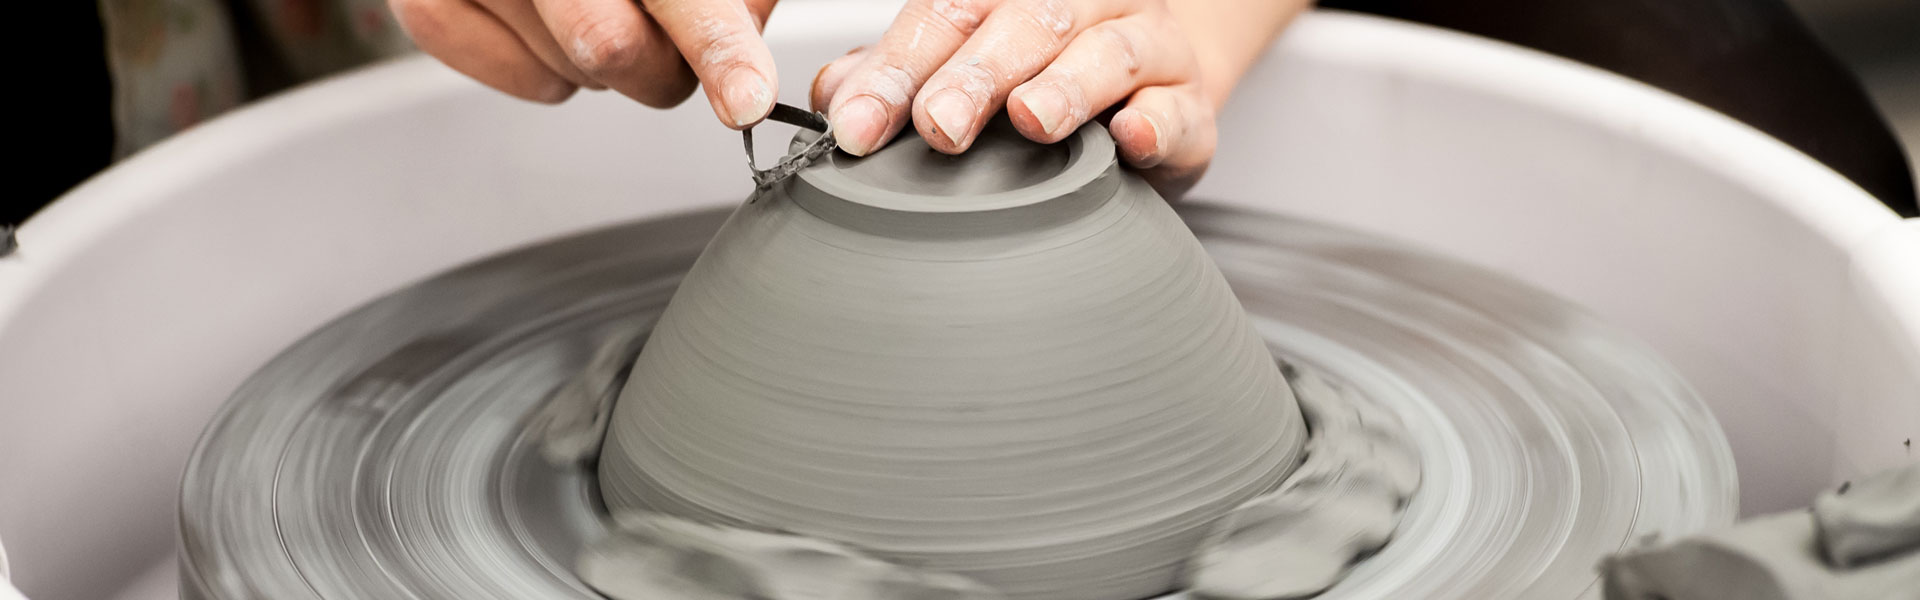 Hands fashioning a bowl on the potter's wheel